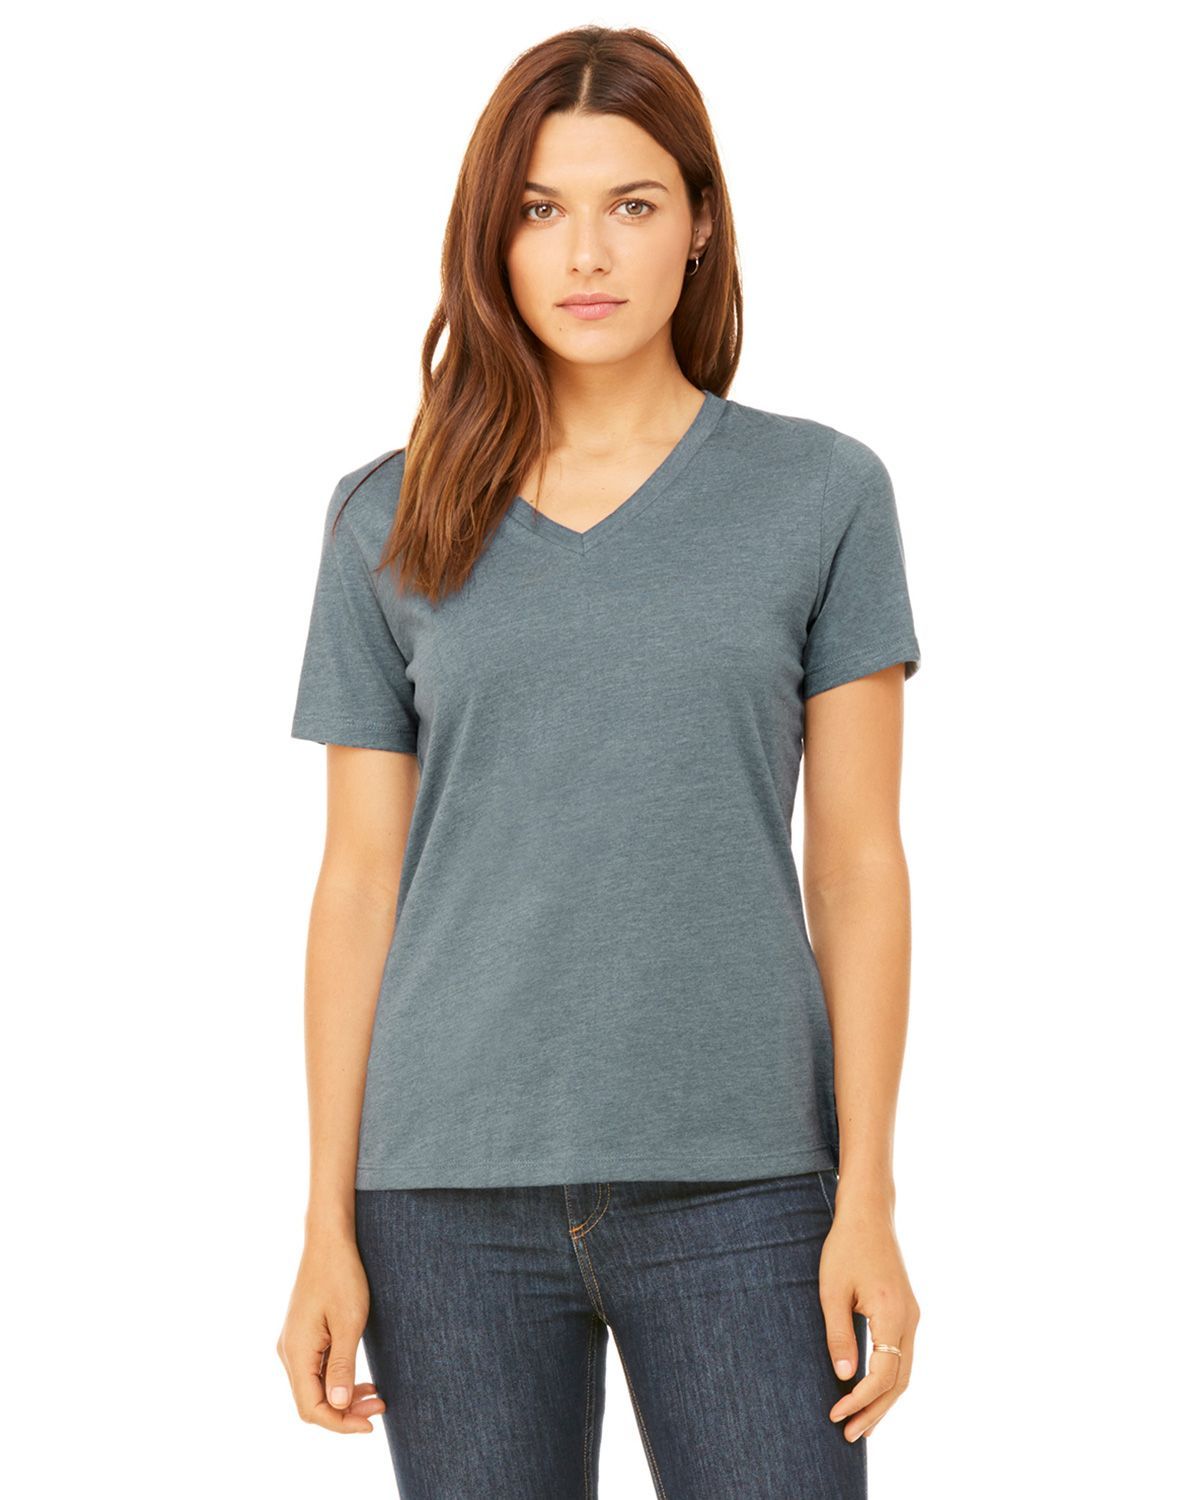 Bella + Canvas 6405 Ladies Missy's Relaxed Jersey Short-Sleeve V-Neck T ...